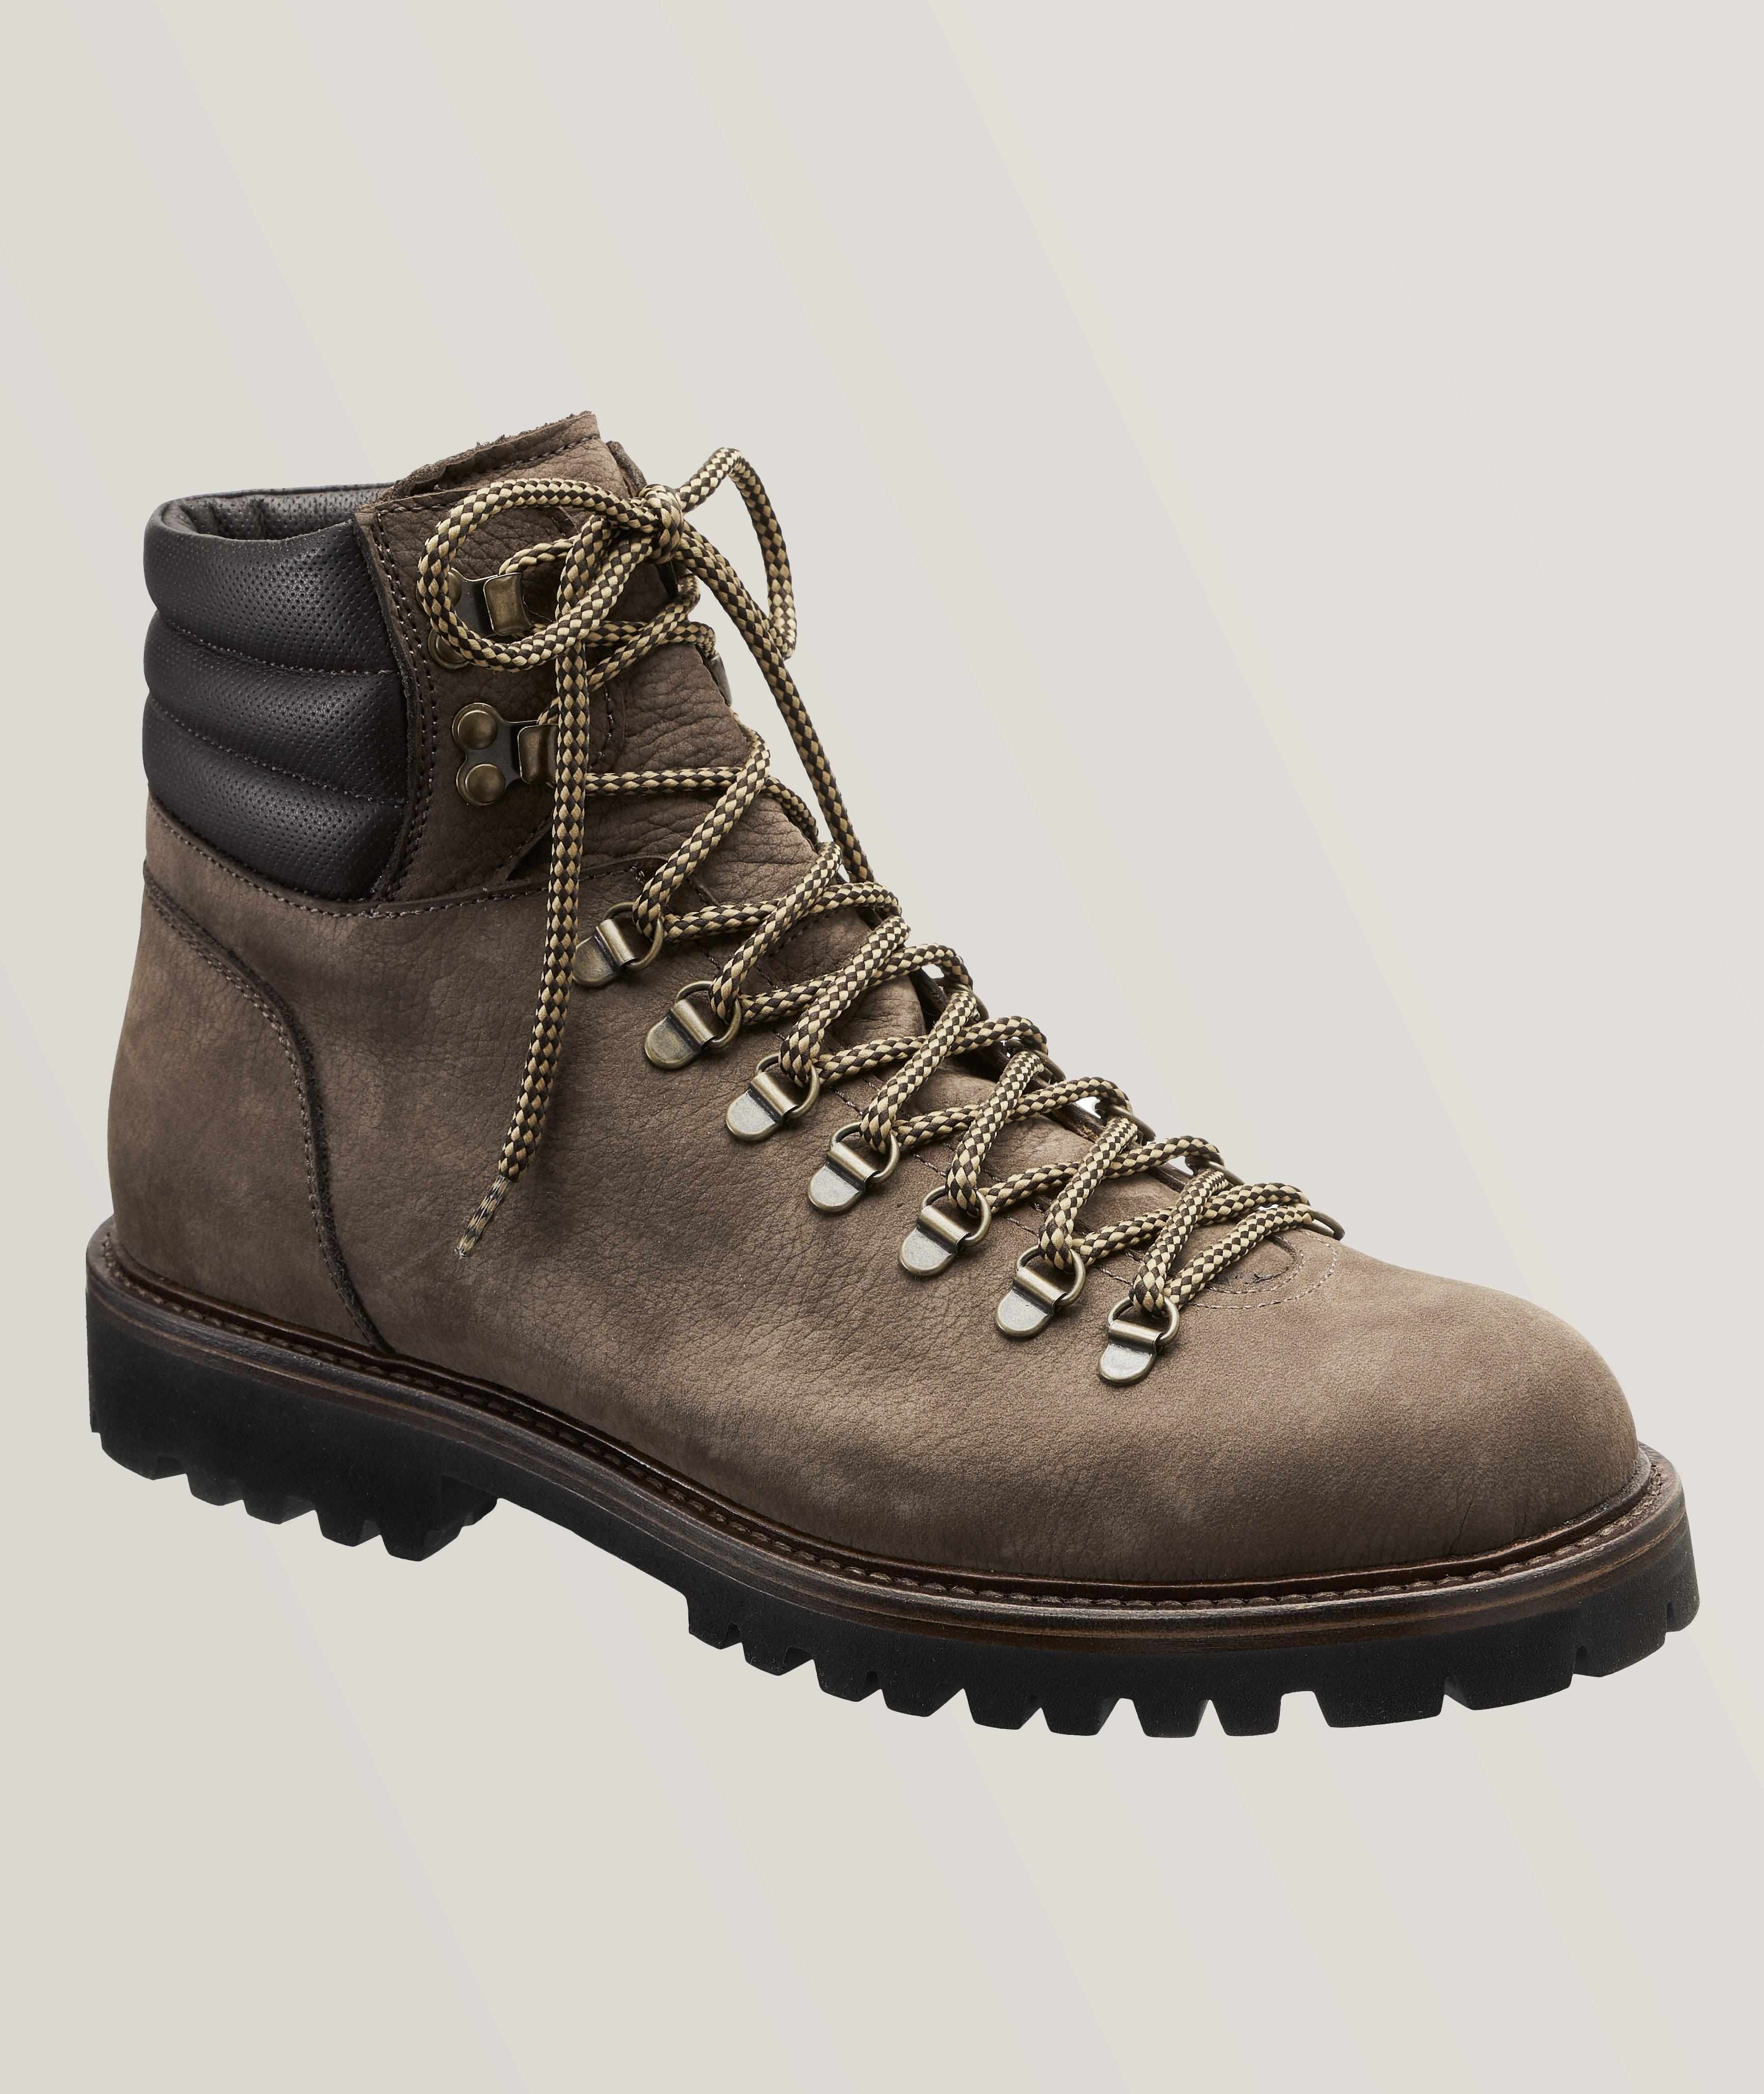 Suede Lace-Up Hiking Boots image 0